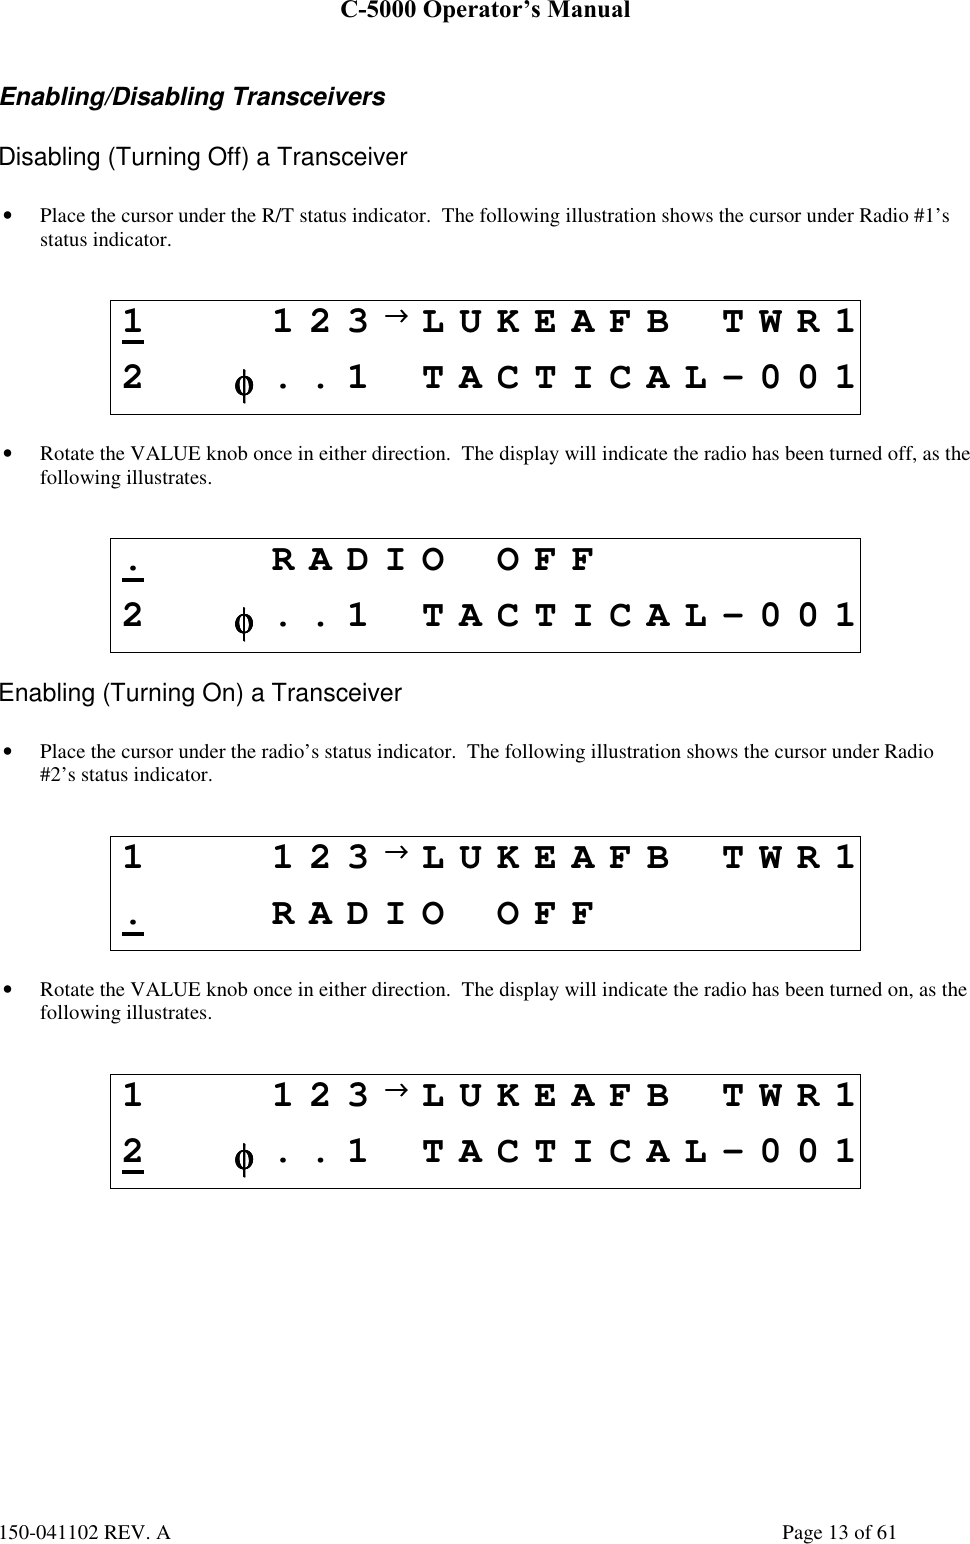 C-5000 Operator’s Manual150-041102 REV. A Page 13 of 61Enabling/Disabling TransceiversDisabling (Turning Off) a Transceiver• Place the cursor under the R/T status indicator.  The following illustration shows the cursor under Radio #1’sstatus indicator.1123→→→→LUKEAFB TWR12φφφφ..1 TACTICAL-001• Rotate the VALUE knob once in either direction.  The display will indicate the radio has been turned off, as thefollowing illustrates..RADIO OFF2φφφφ..1 TACTICAL-001Enabling (Turning On) a Transceiver• Place the cursor under the radio’s status indicator.  The following illustration shows the cursor under Radio#2’s status indicator.1 123→→→→LUKEAFB TWR1.RADIO OFF• Rotate the VALUE knob once in either direction.  The display will indicate the radio has been turned on, as thefollowing illustrates.1 123→→→→LUKEAFB TWR12φφφφ..1 TACTICAL-001